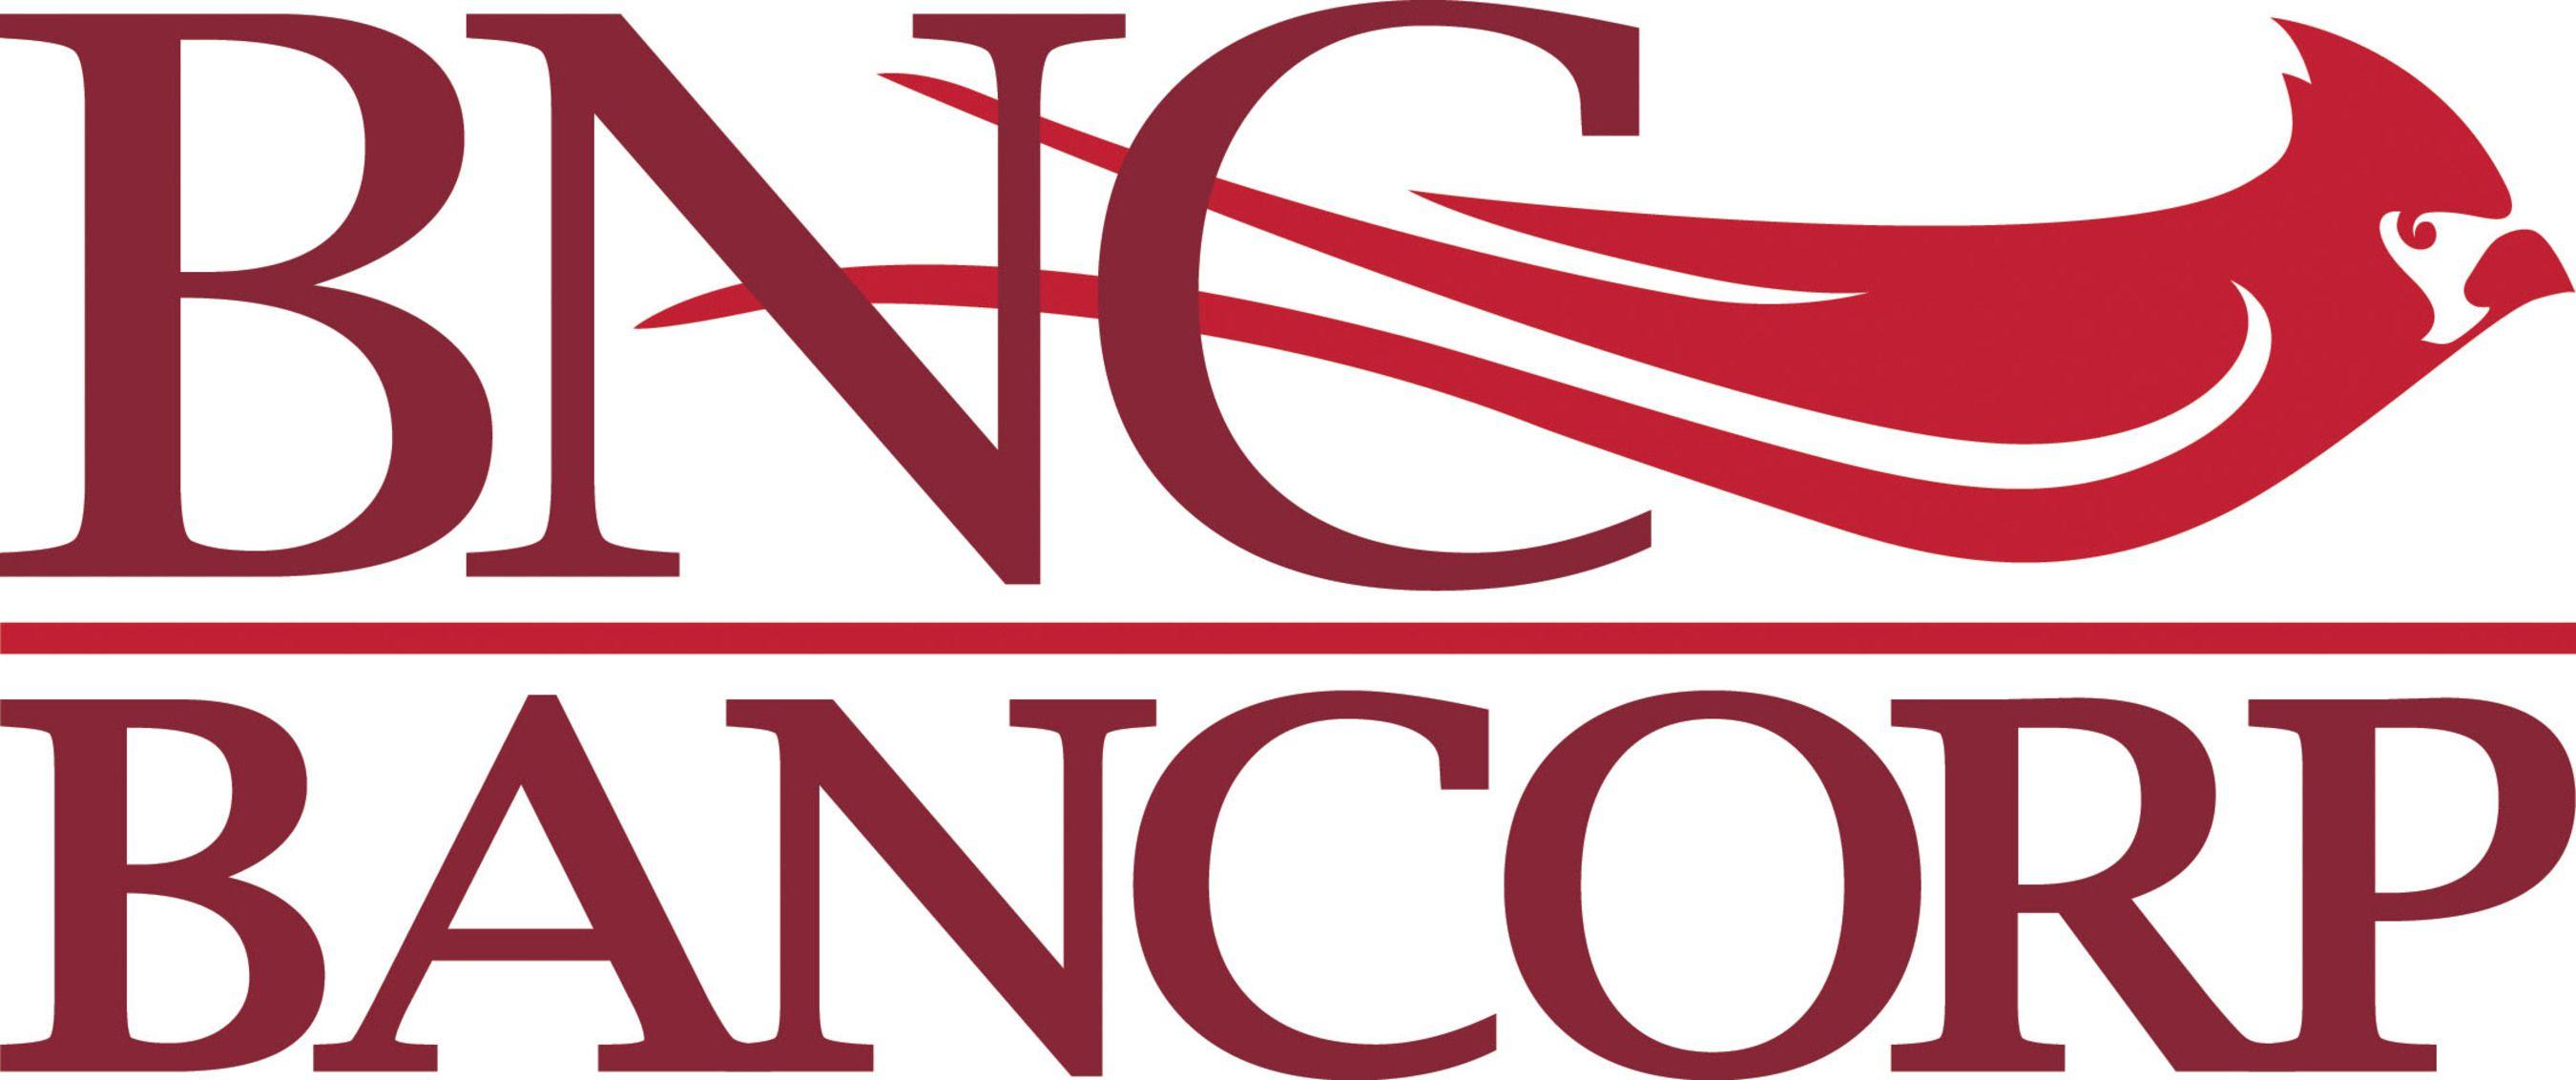 Bancorp Logo - BNC Bancorp Announces Receipt of Regulatory Approvals for High Point ...